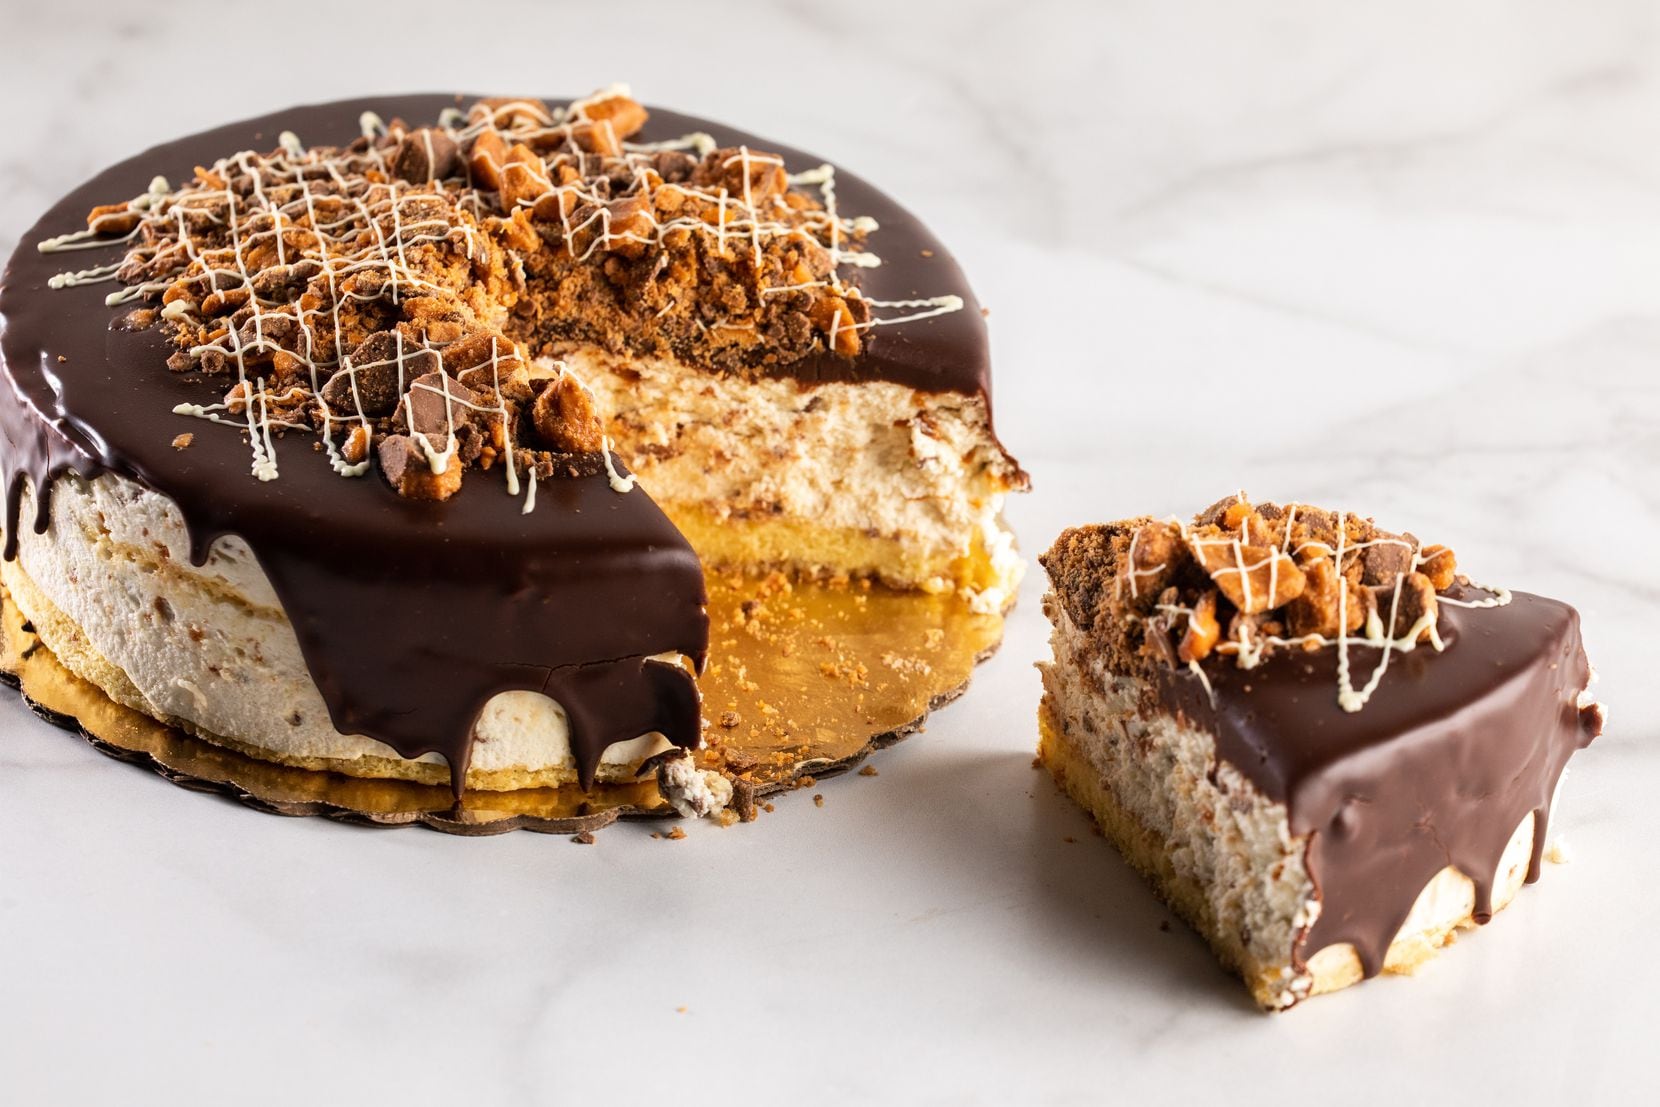 Eatzi's Market and Bakery is offering a Butterfinger white chocolate cake beginning June 19...